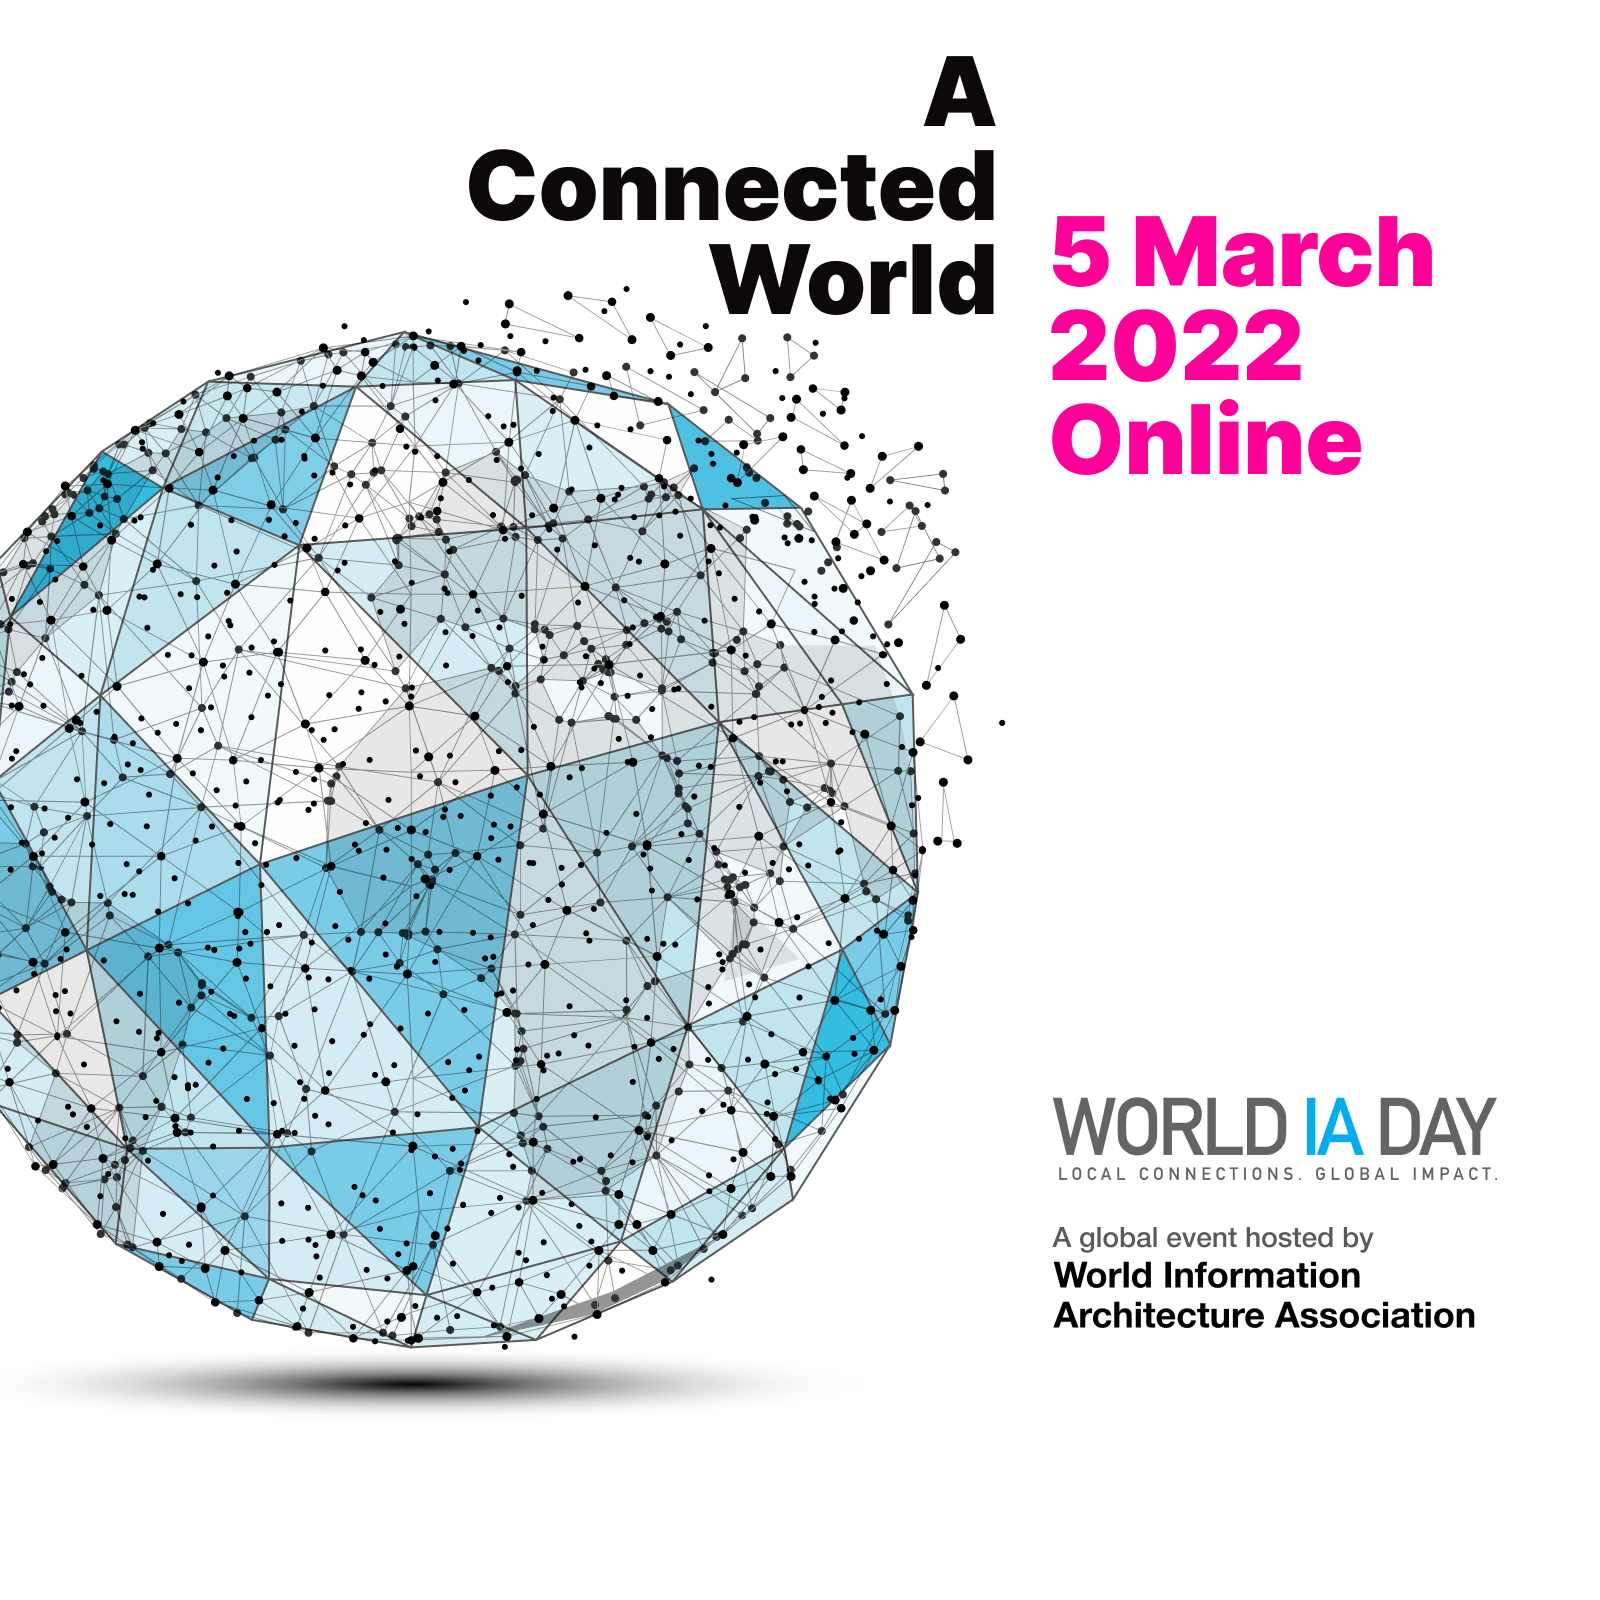 WIAD22 theme image showing A Connected World as the theme text and 5 March 2022 as the event date over an outline of the World IA Day logo